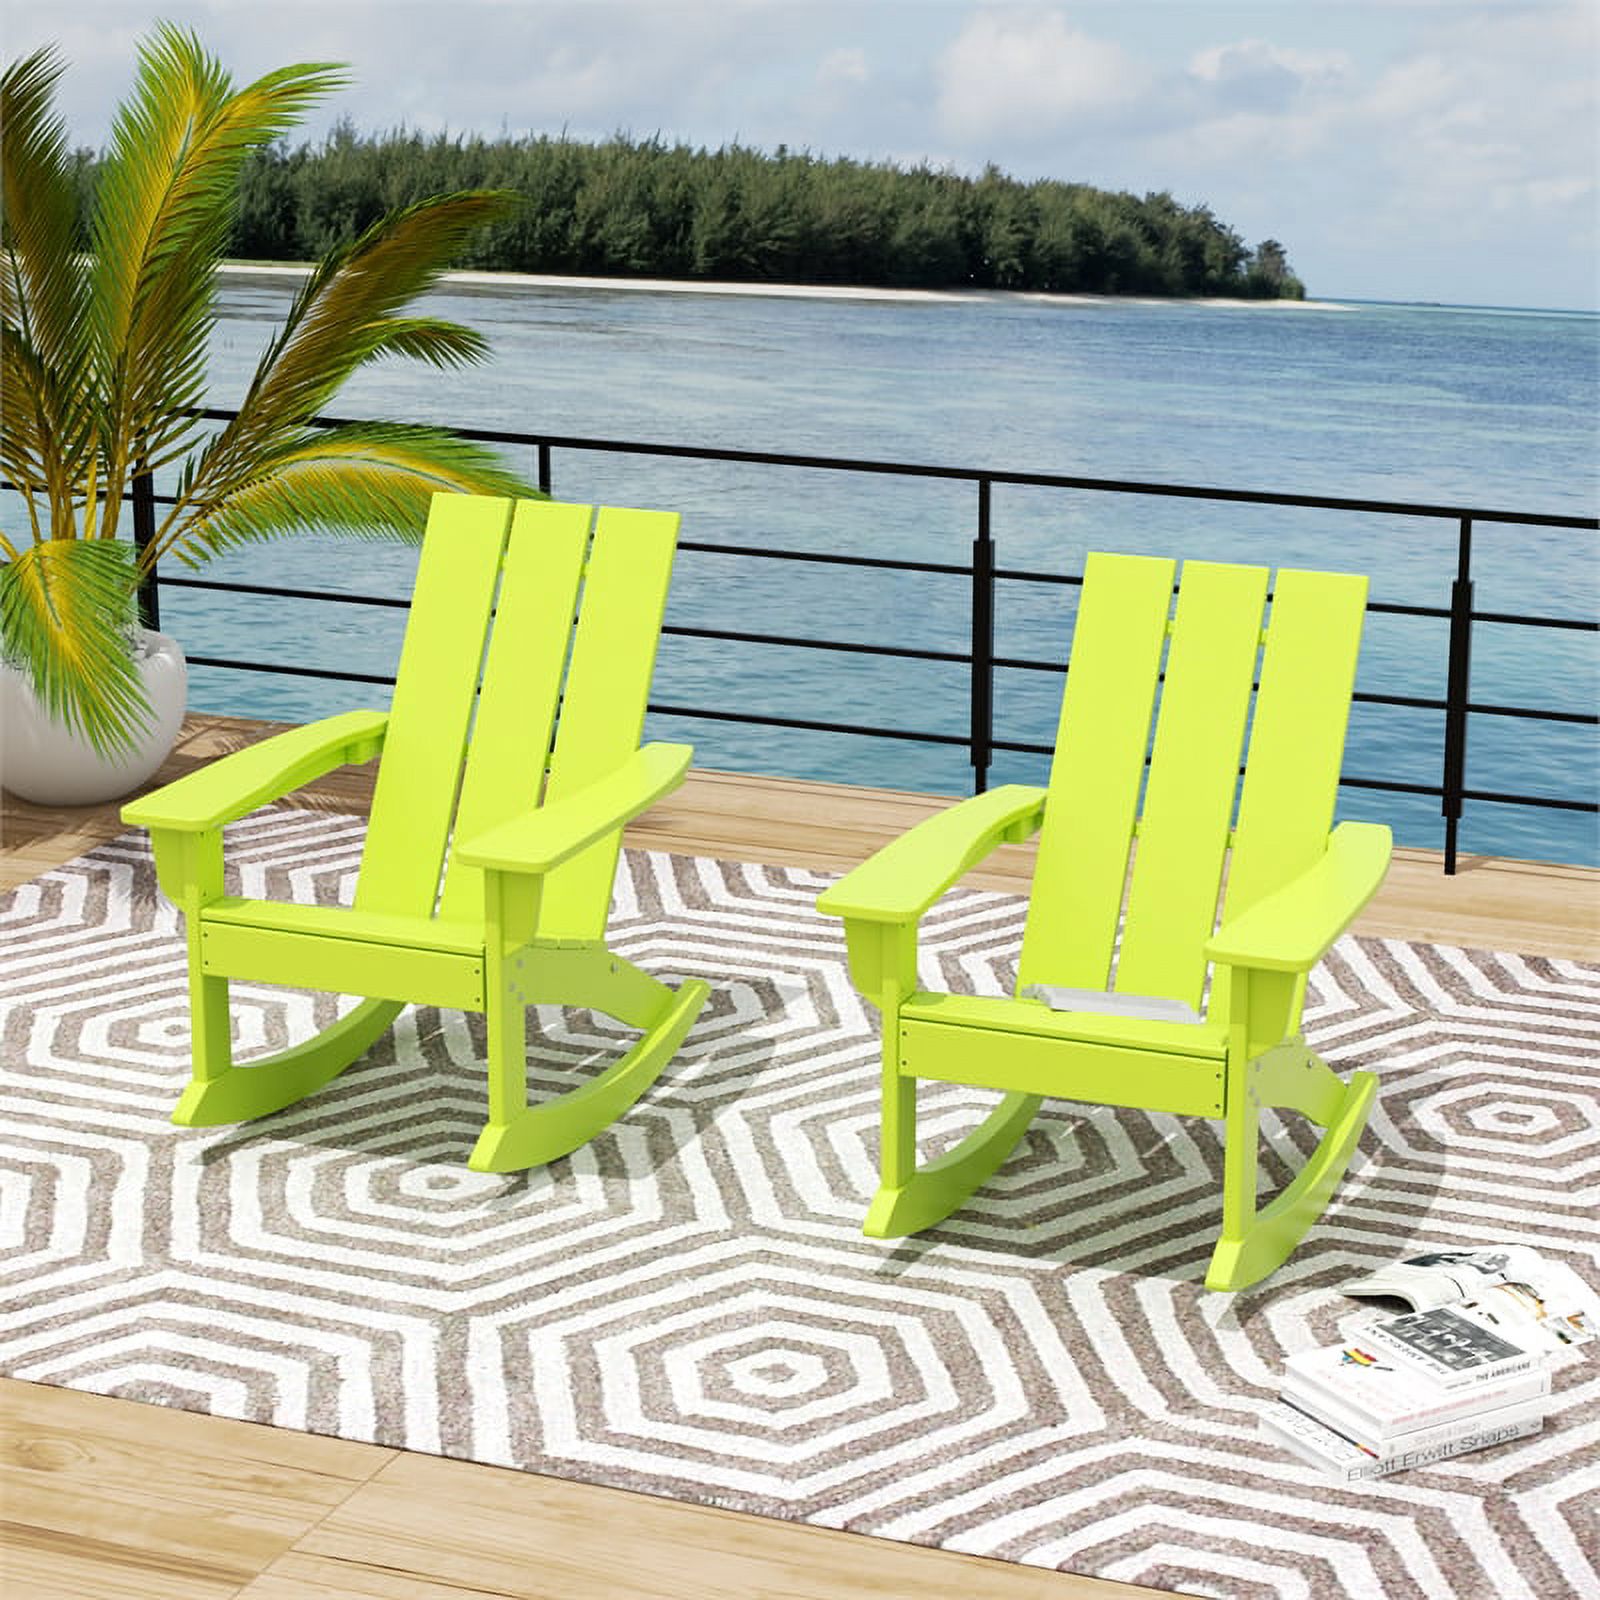 Costaelm Palms Outdoor HDPE Plastic Adirondack Rocking Chair (Set of 2), Lime - image 2 of 8